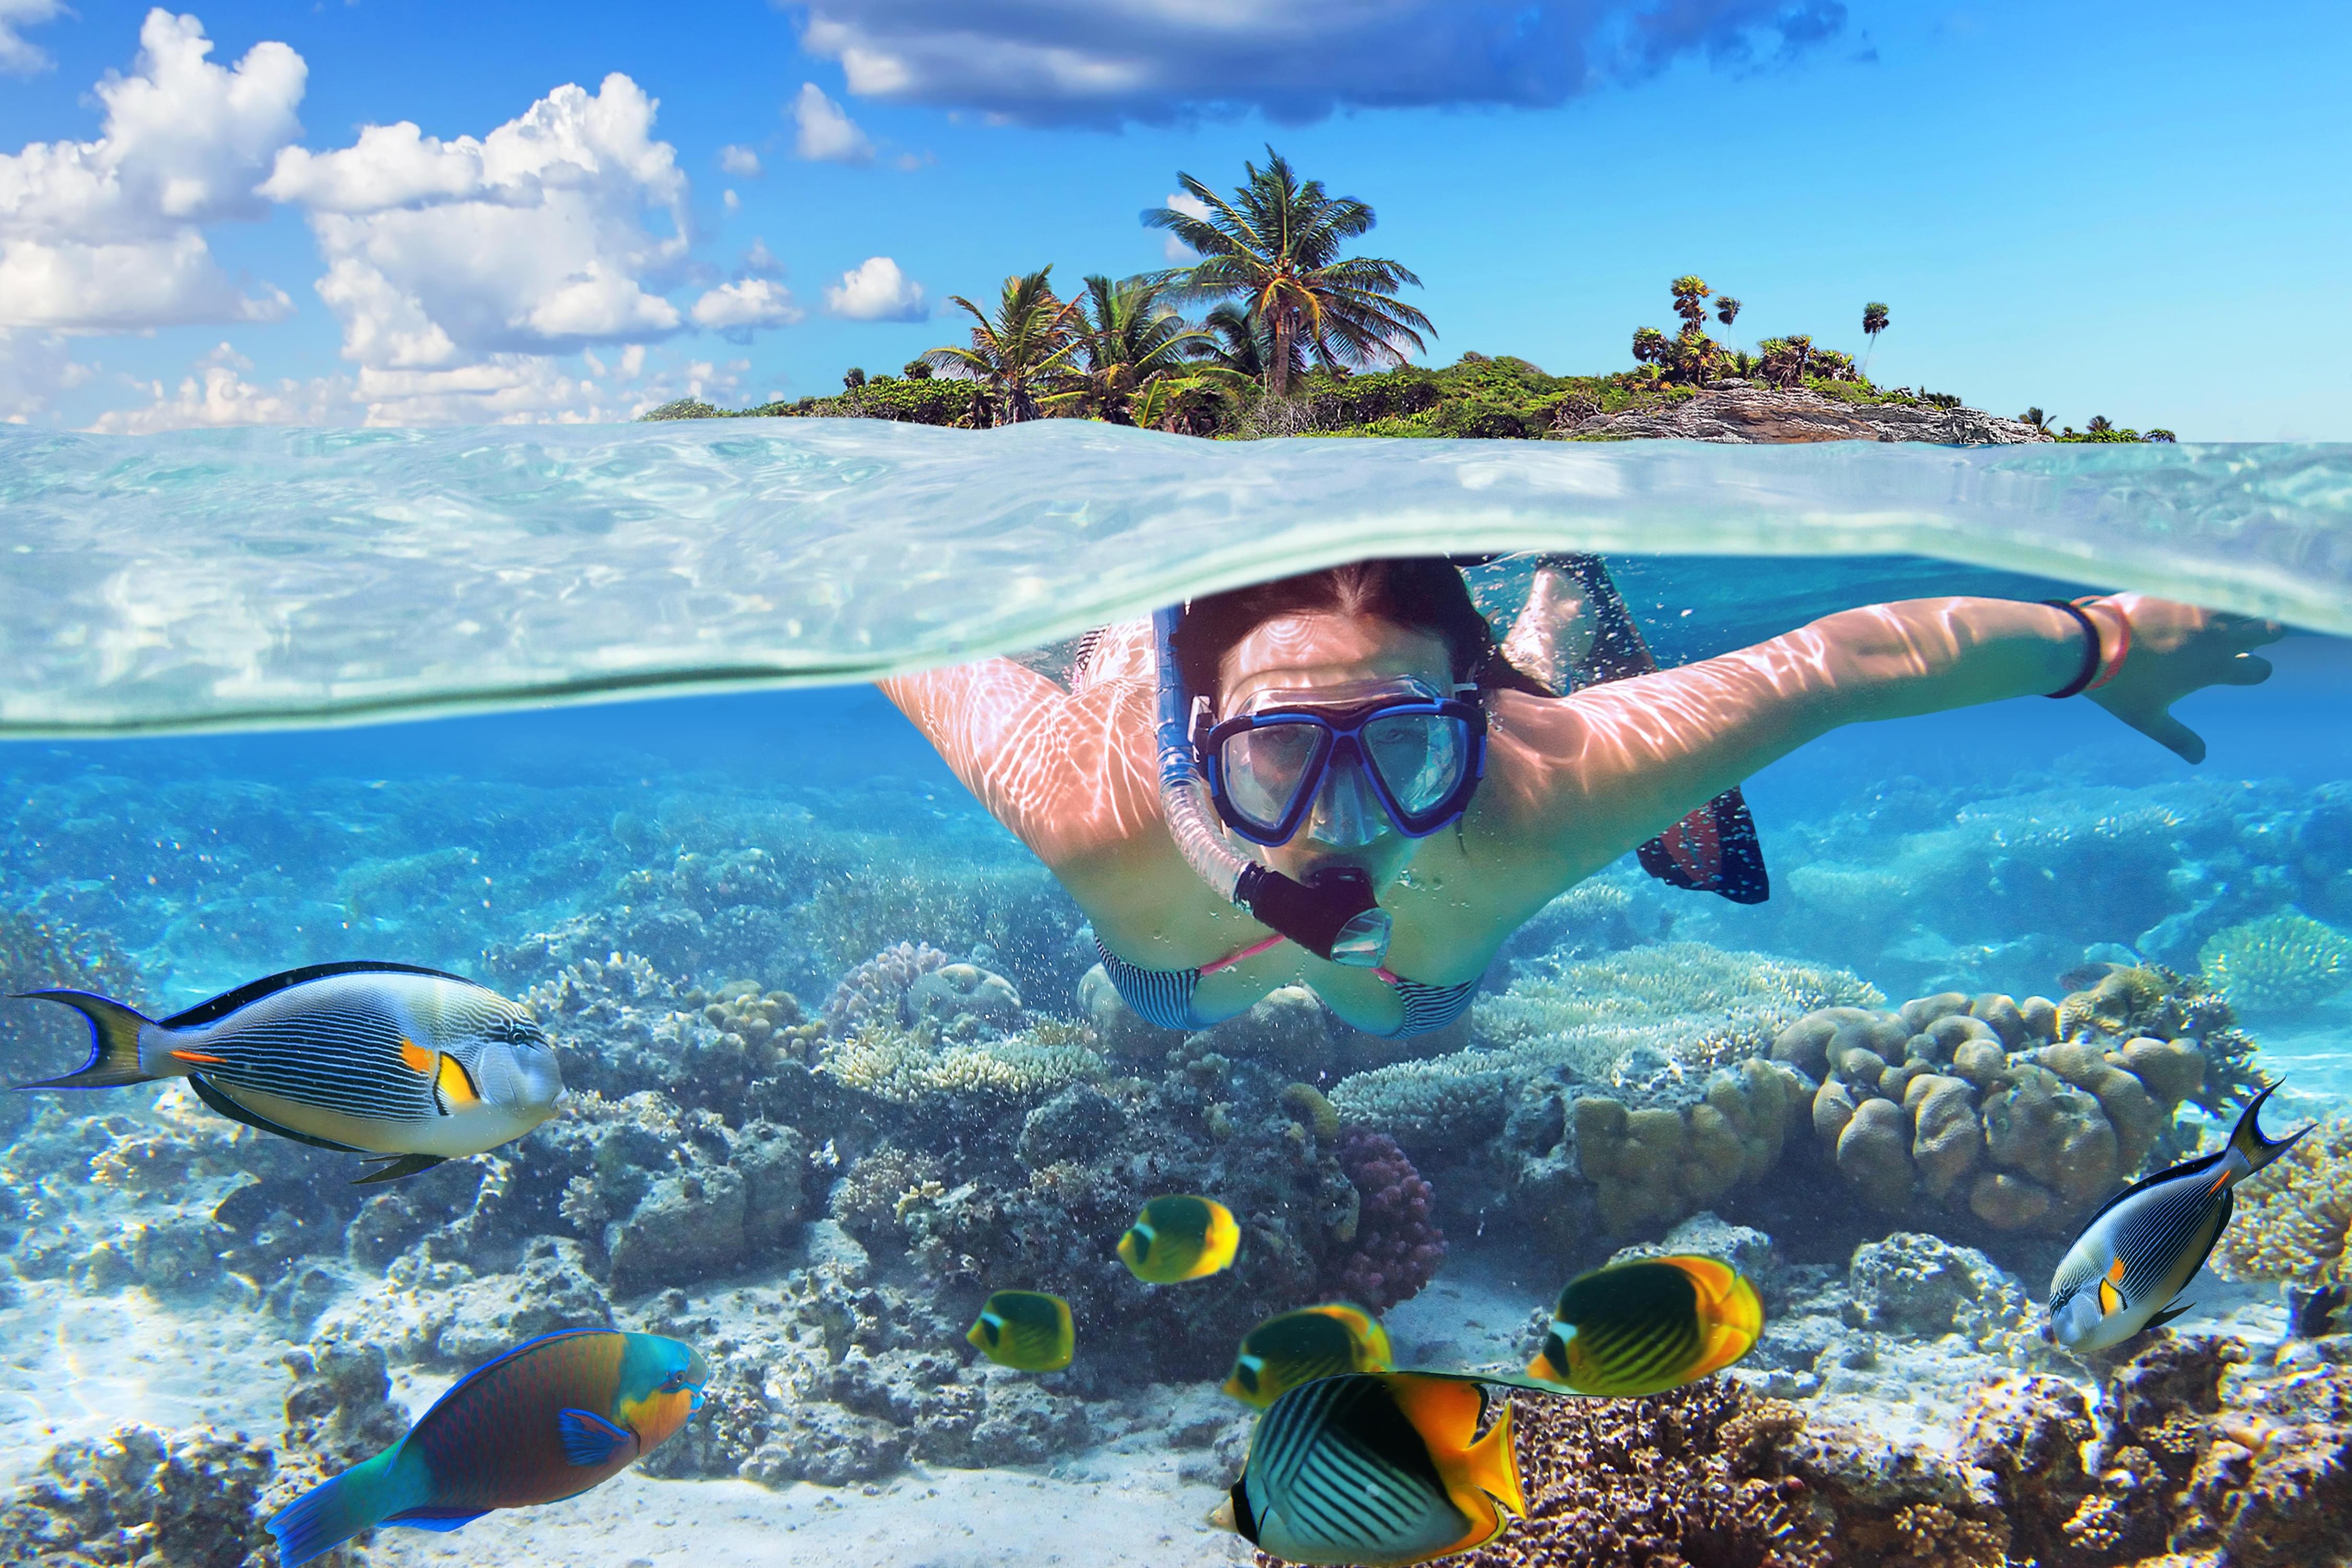 Explore the Underwater World during a Snorkeling Session